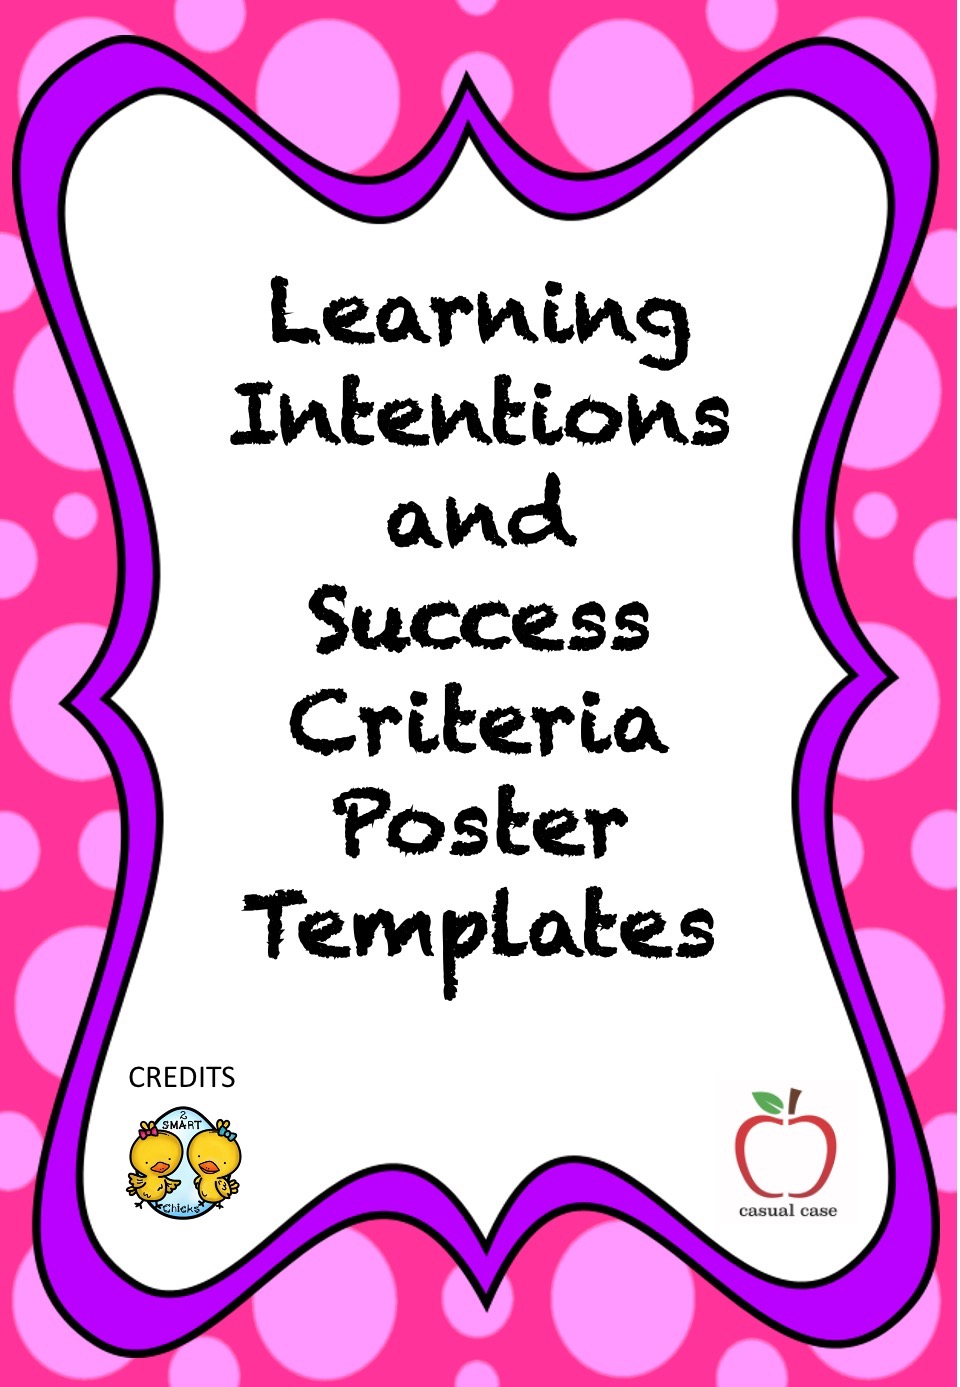 Learning Intentions and Success Criteria Templates » Casual Case Template